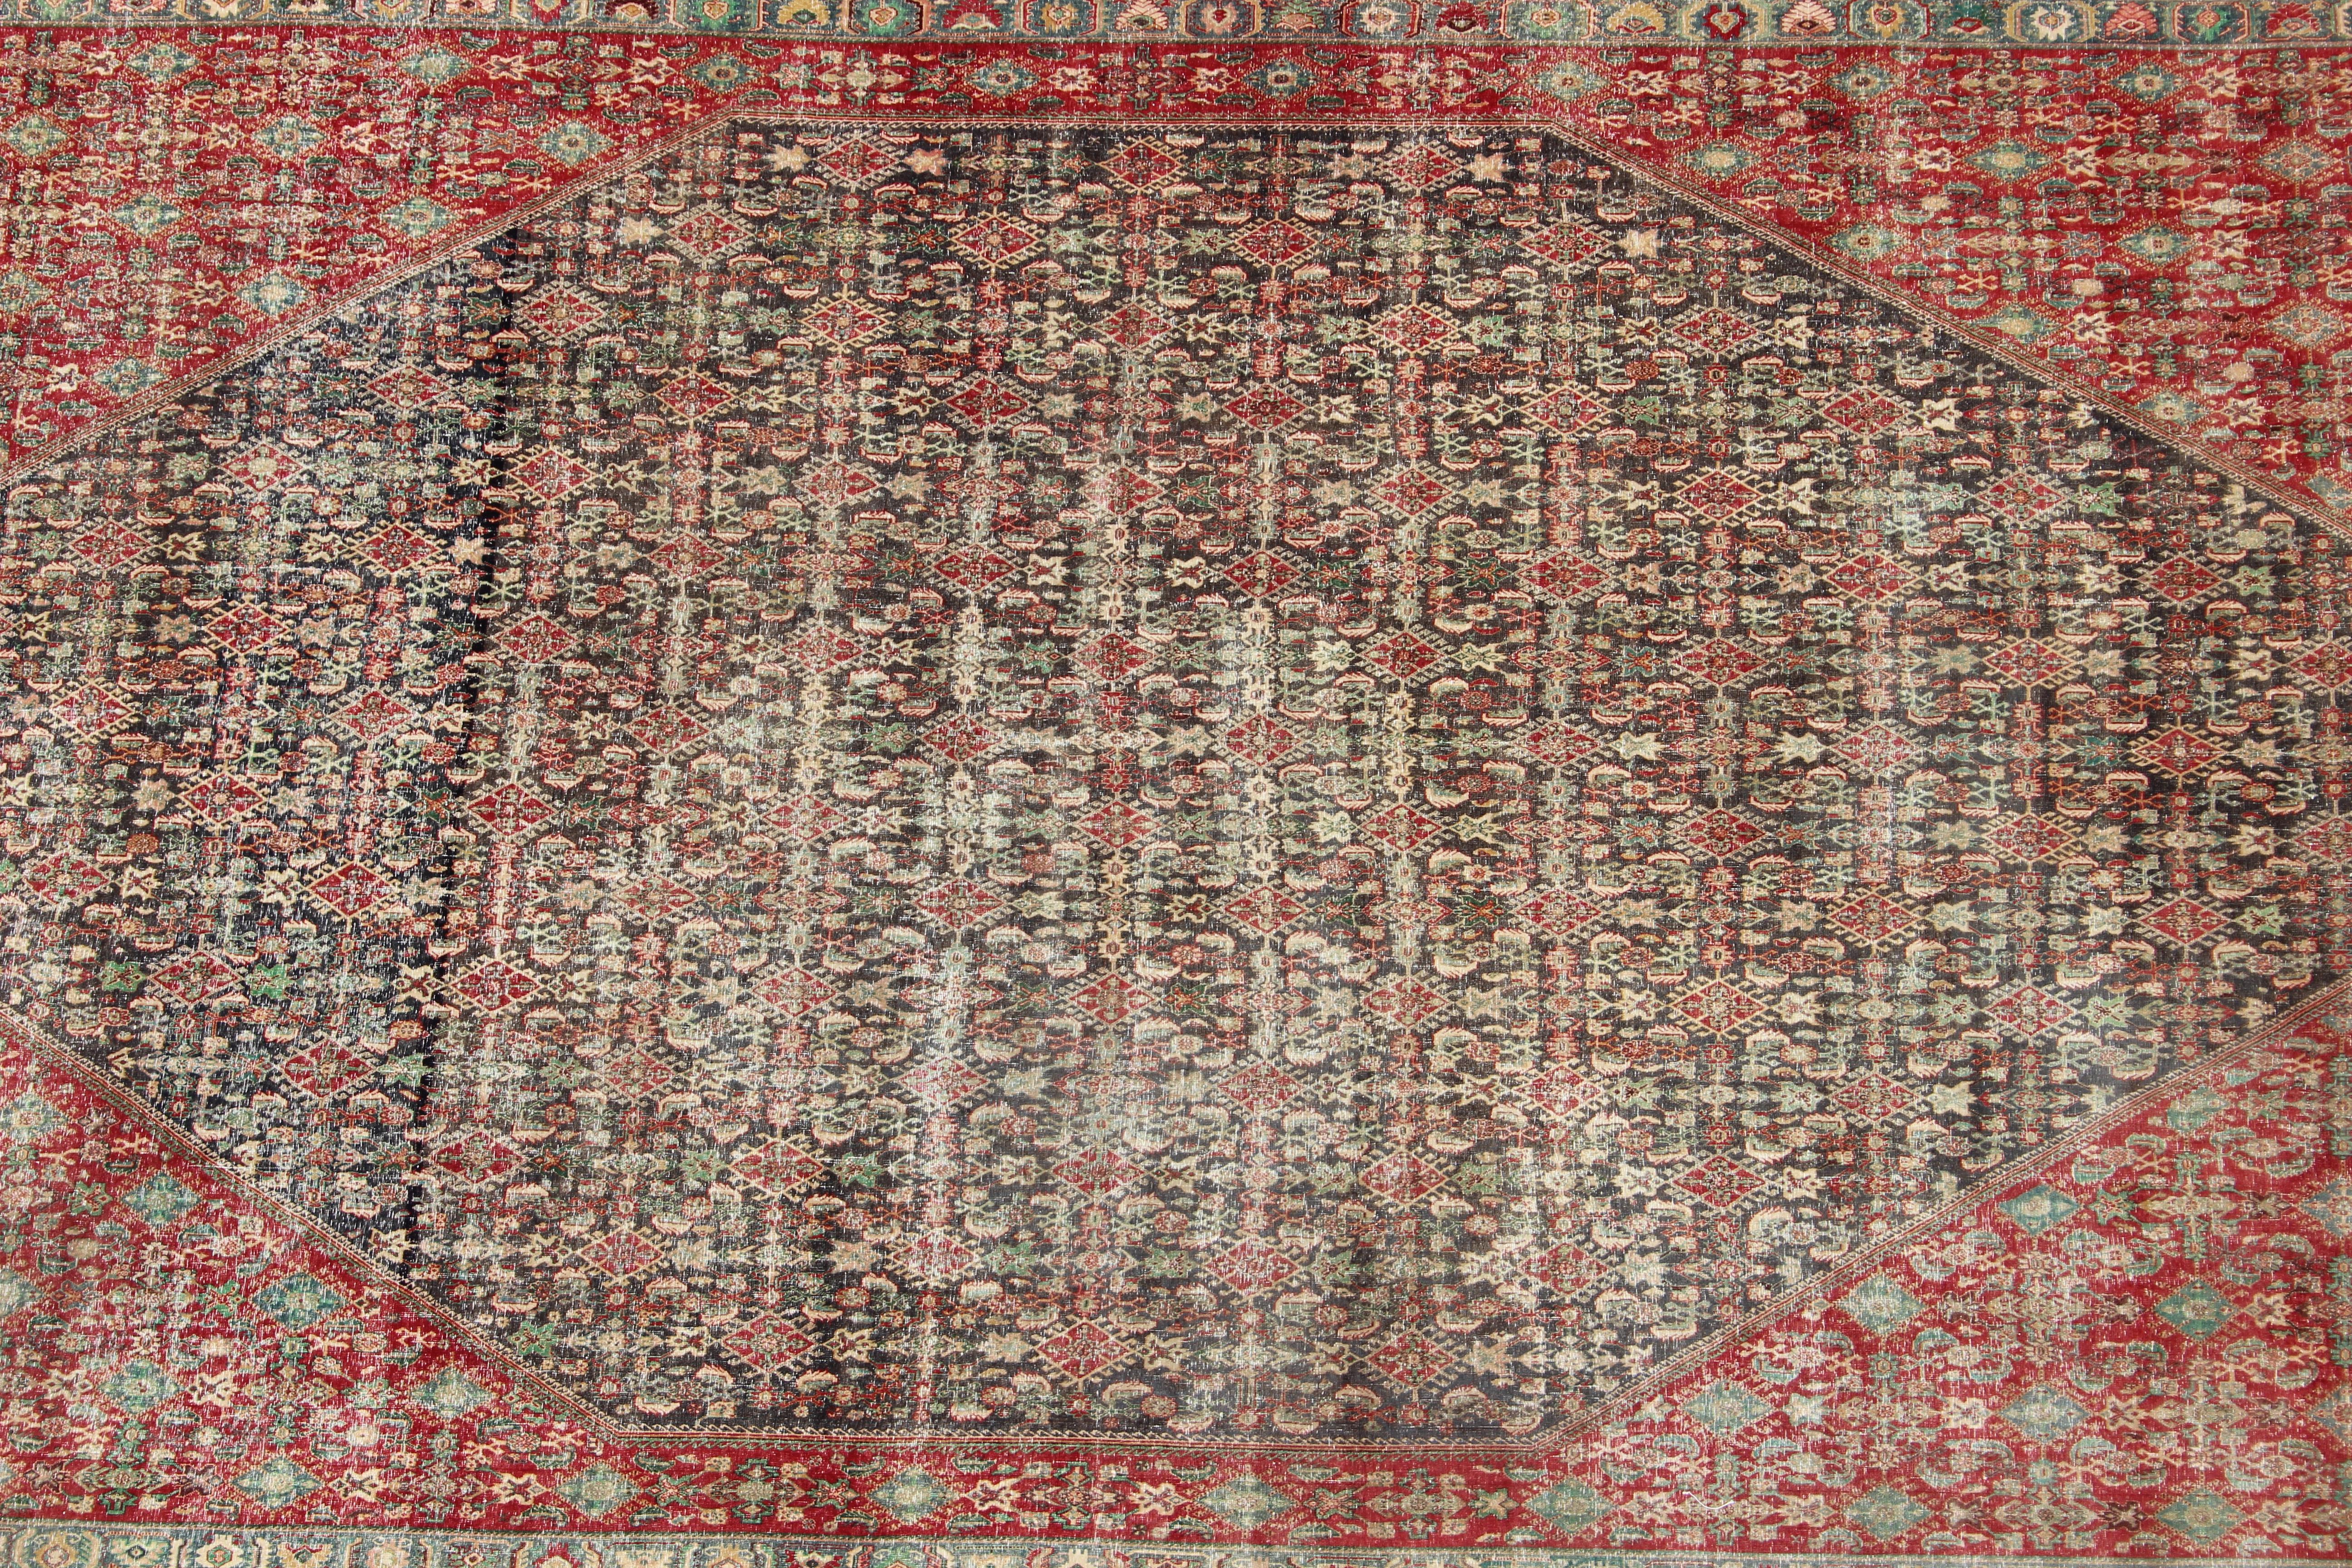 Colorful Large Persian Antique Qashqai rug with A Beautiful Tribal Motif Design In Good Condition For Sale In Atlanta, GA